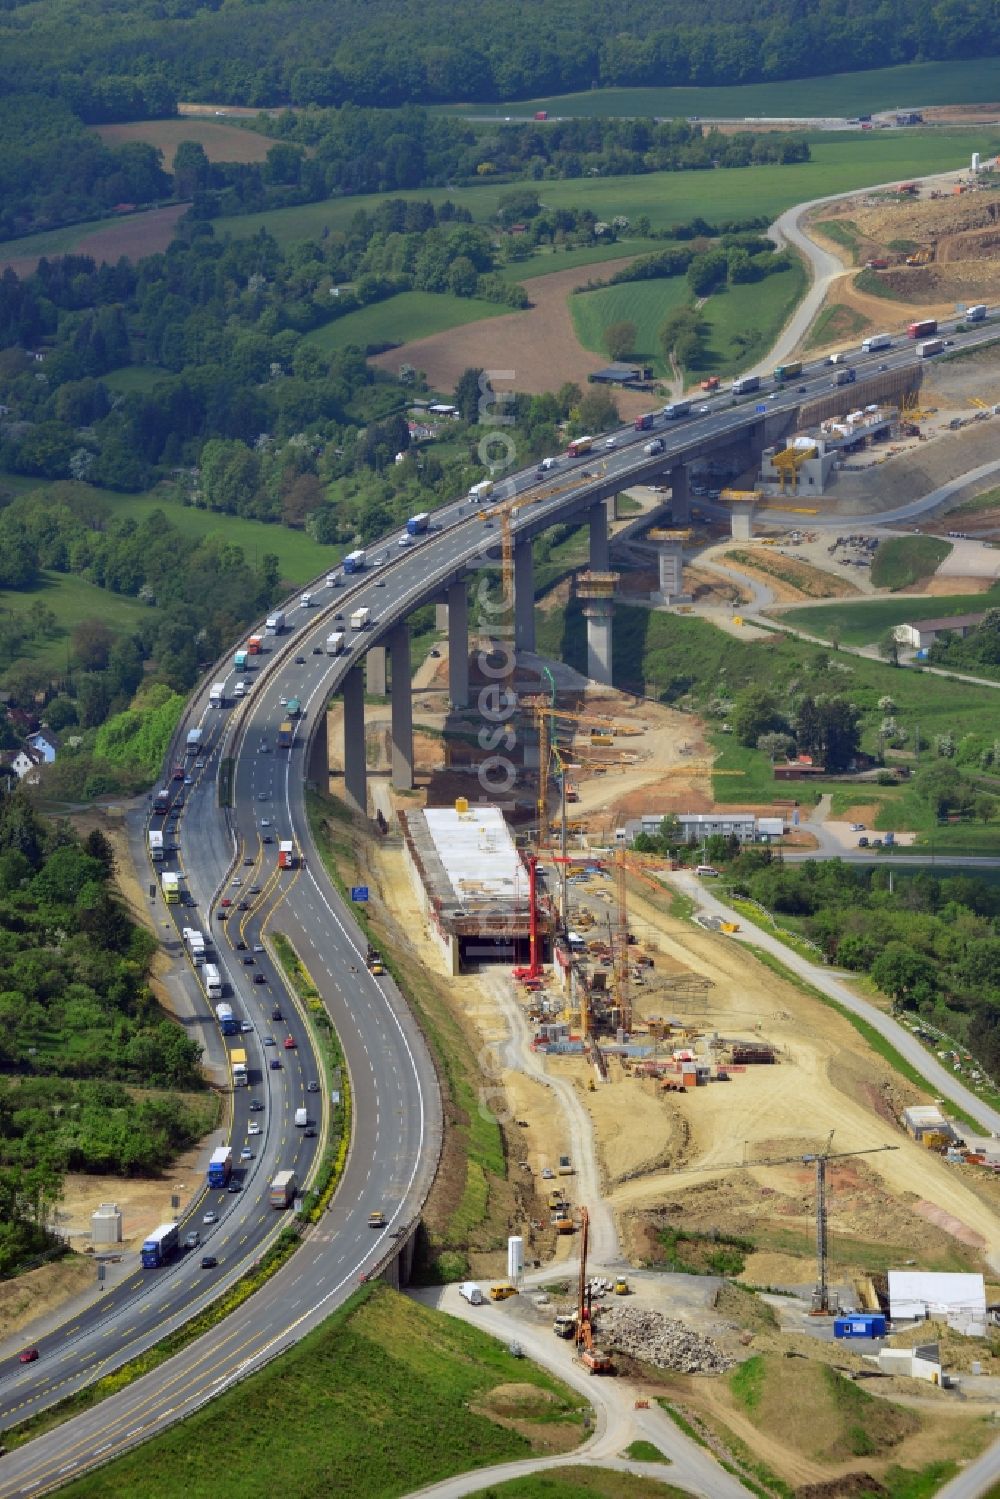 Aerial image Würzburg - Construction work at the Heidingsfeld valley bridge of the federal motorway A3 in the South of Wuerzburg in the state of Bavaria. The bridge spans a valley between two hills. In 2014 it was completely rebuilt by the Arbeitsgemeinschaft Talbruecke Heidingsfeld consisting of Ed. Zueblin AG, Direktion Brueckenbau Bereich Sued Ost und Donges Steeltec